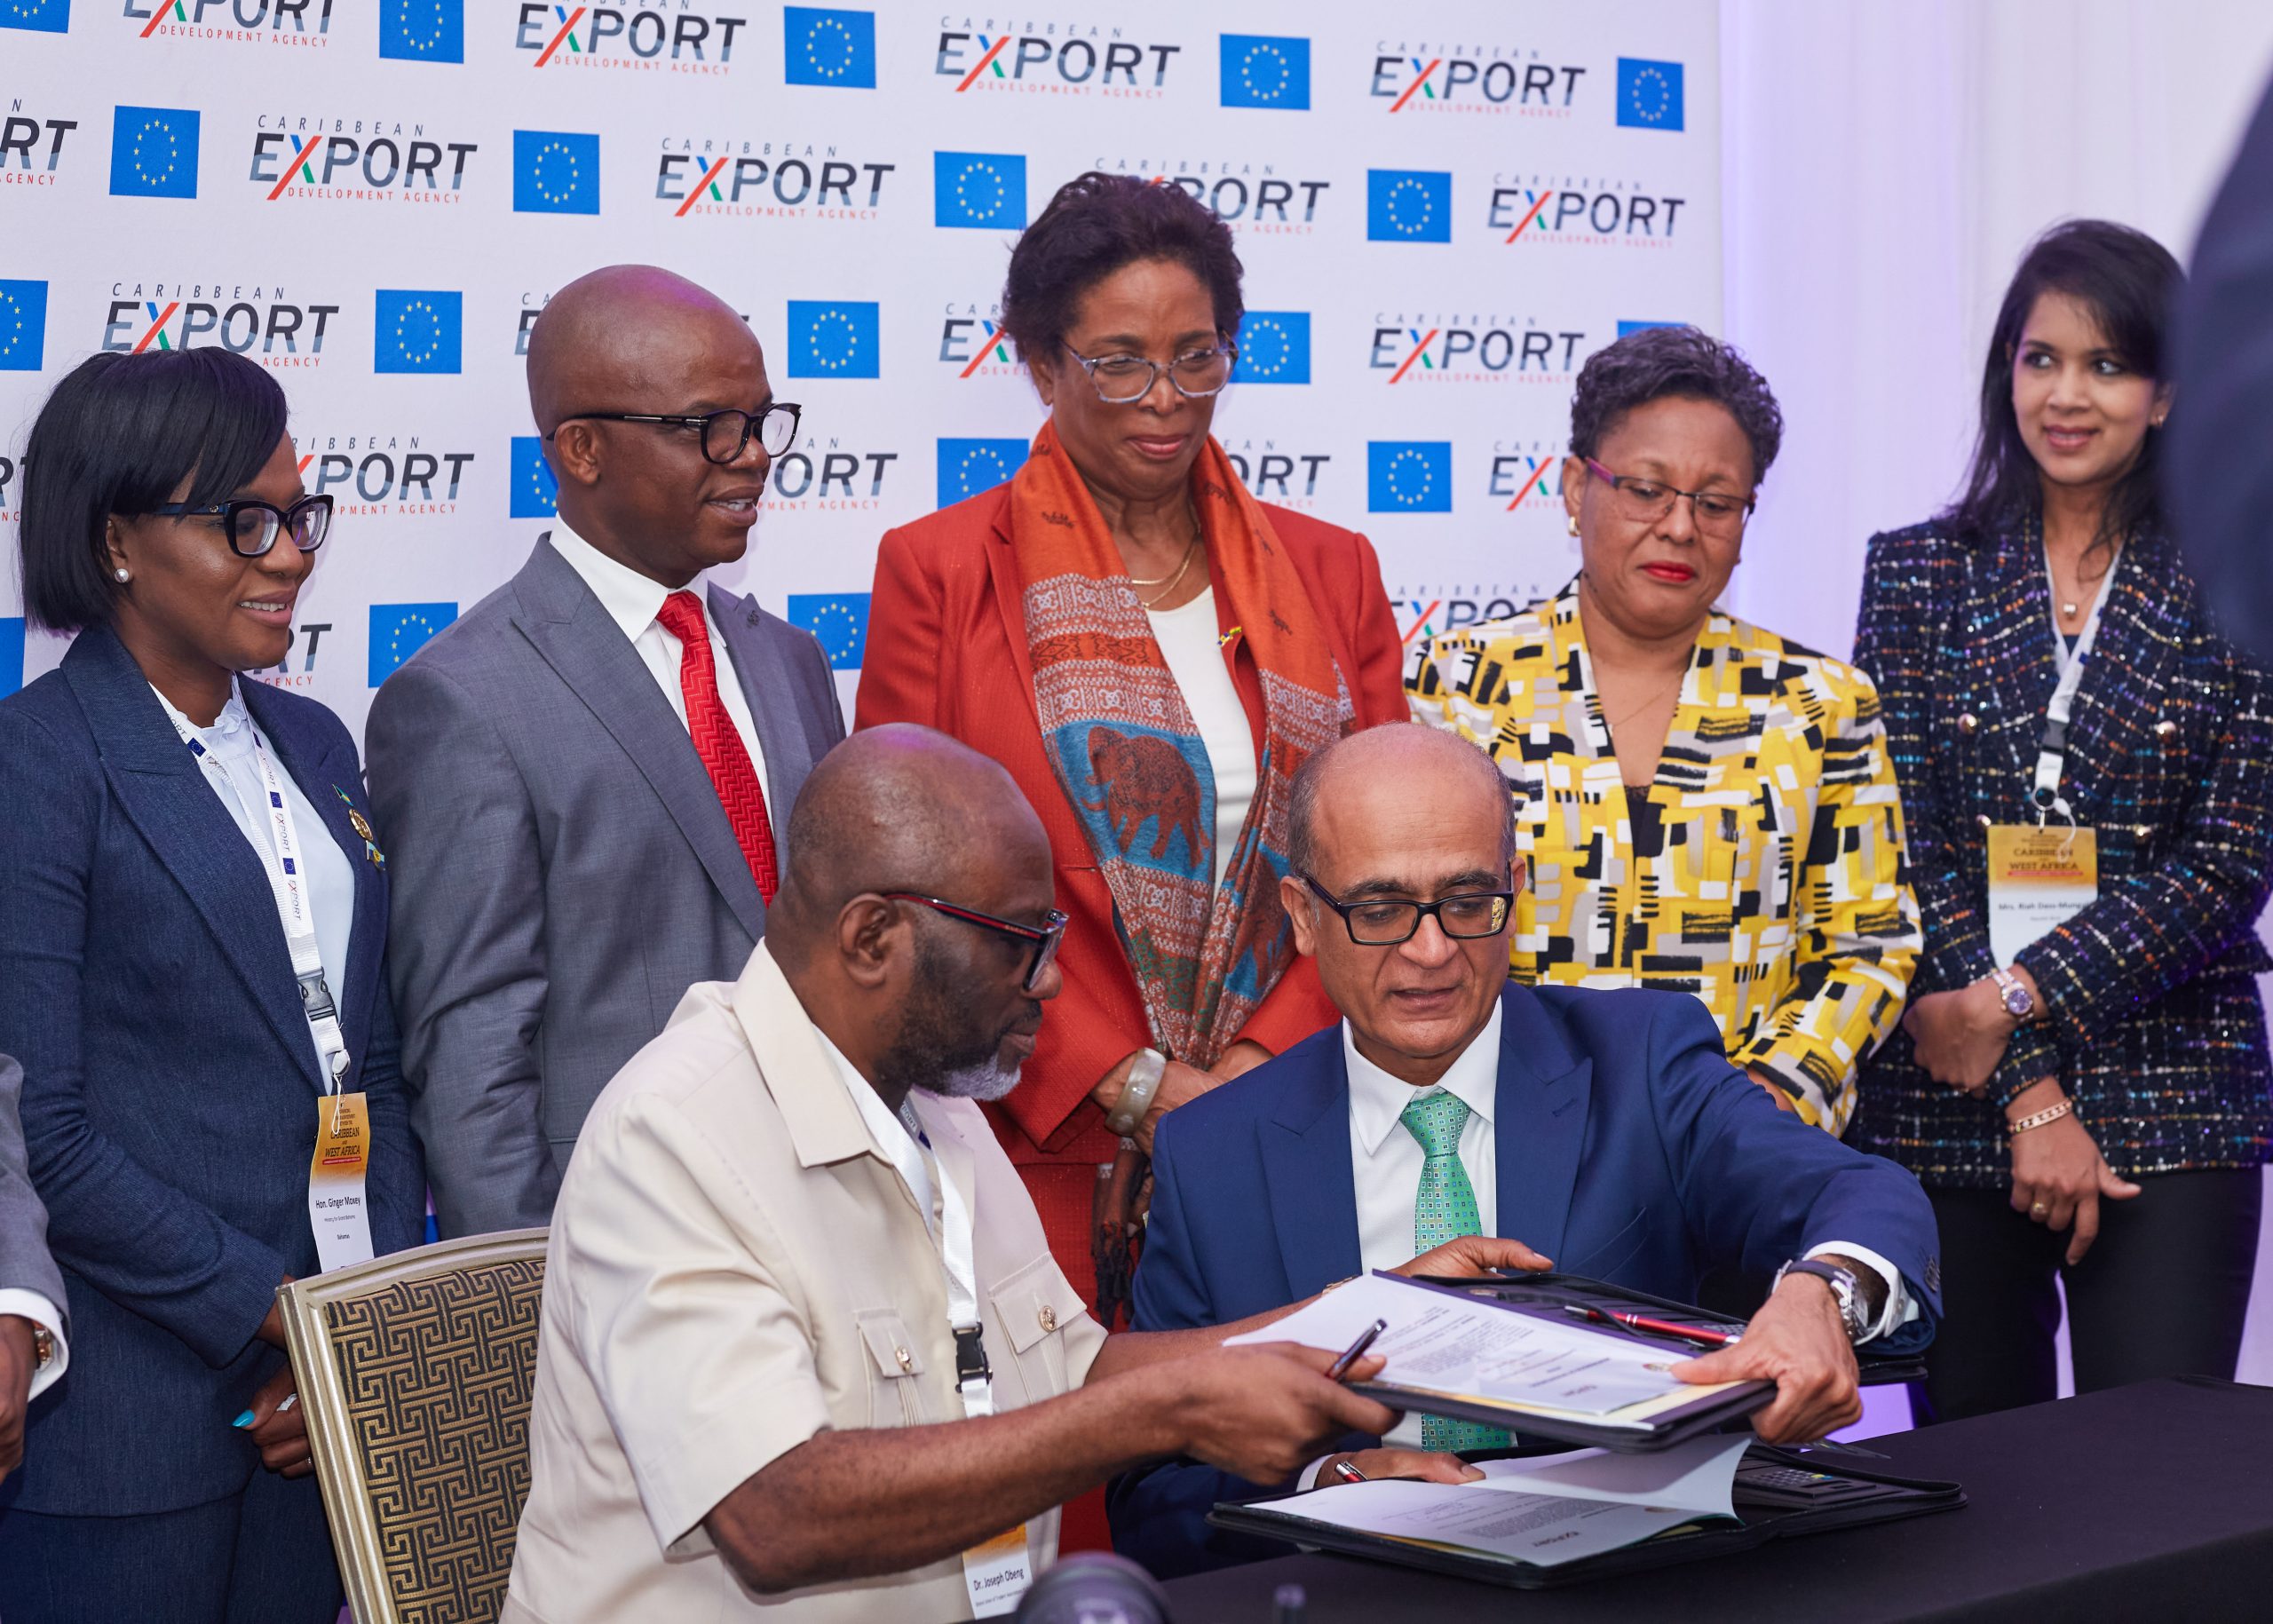 Caribbean Export Signs Three MOUs to Support the Increased Trade Between the Caribbean and Ghana